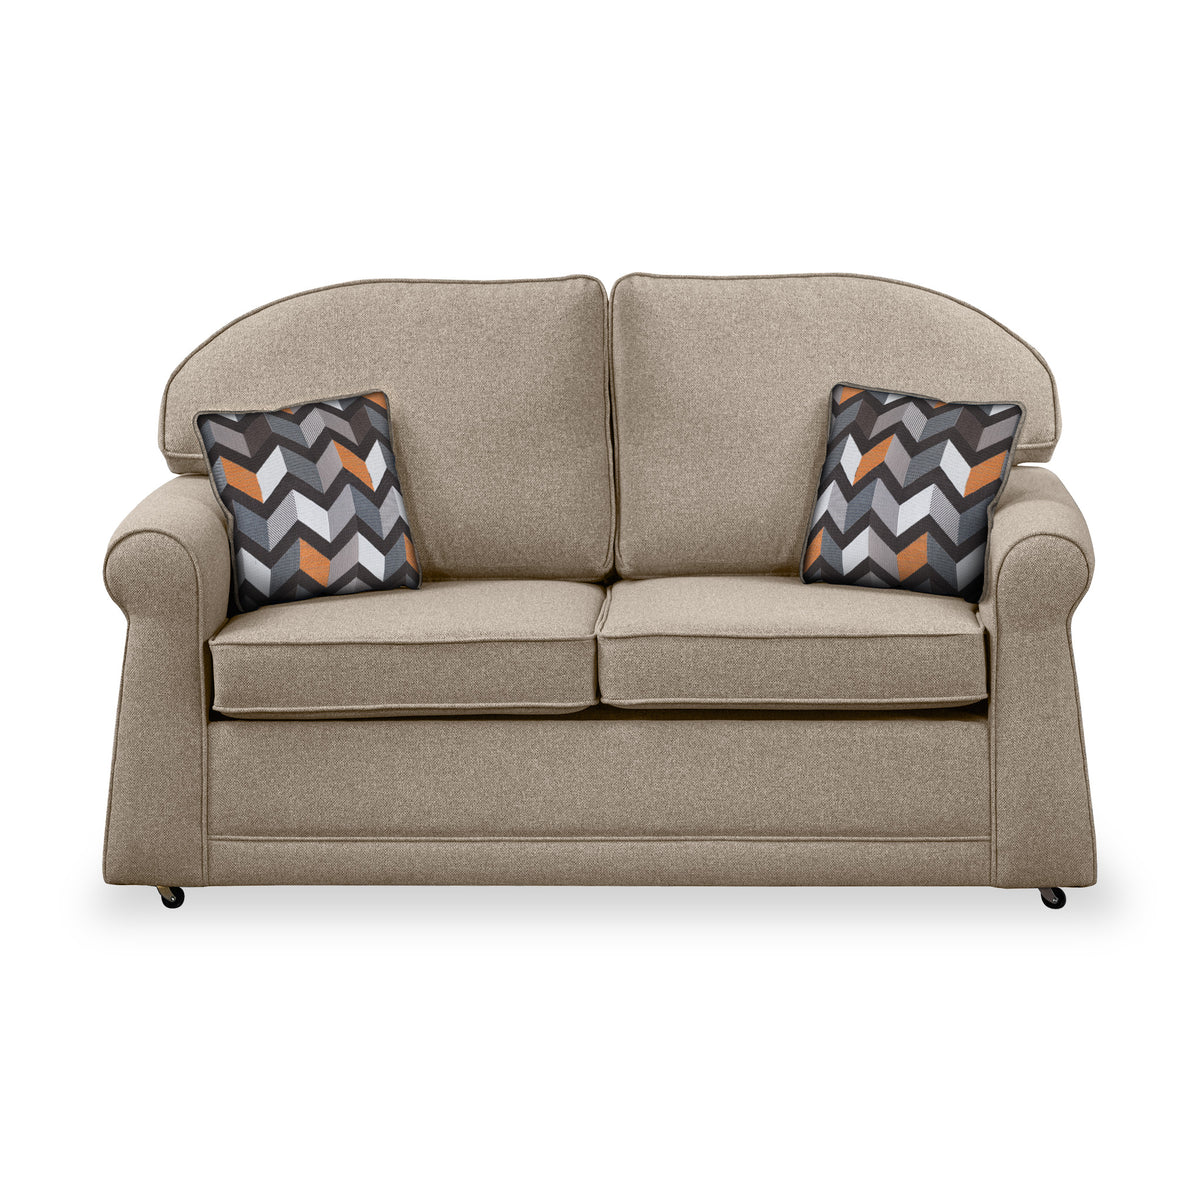 Croxdon Oatmeal Faux Linen 2 Seater Sofabed with Charcoal Scatter Cushions from Roseland Furniture